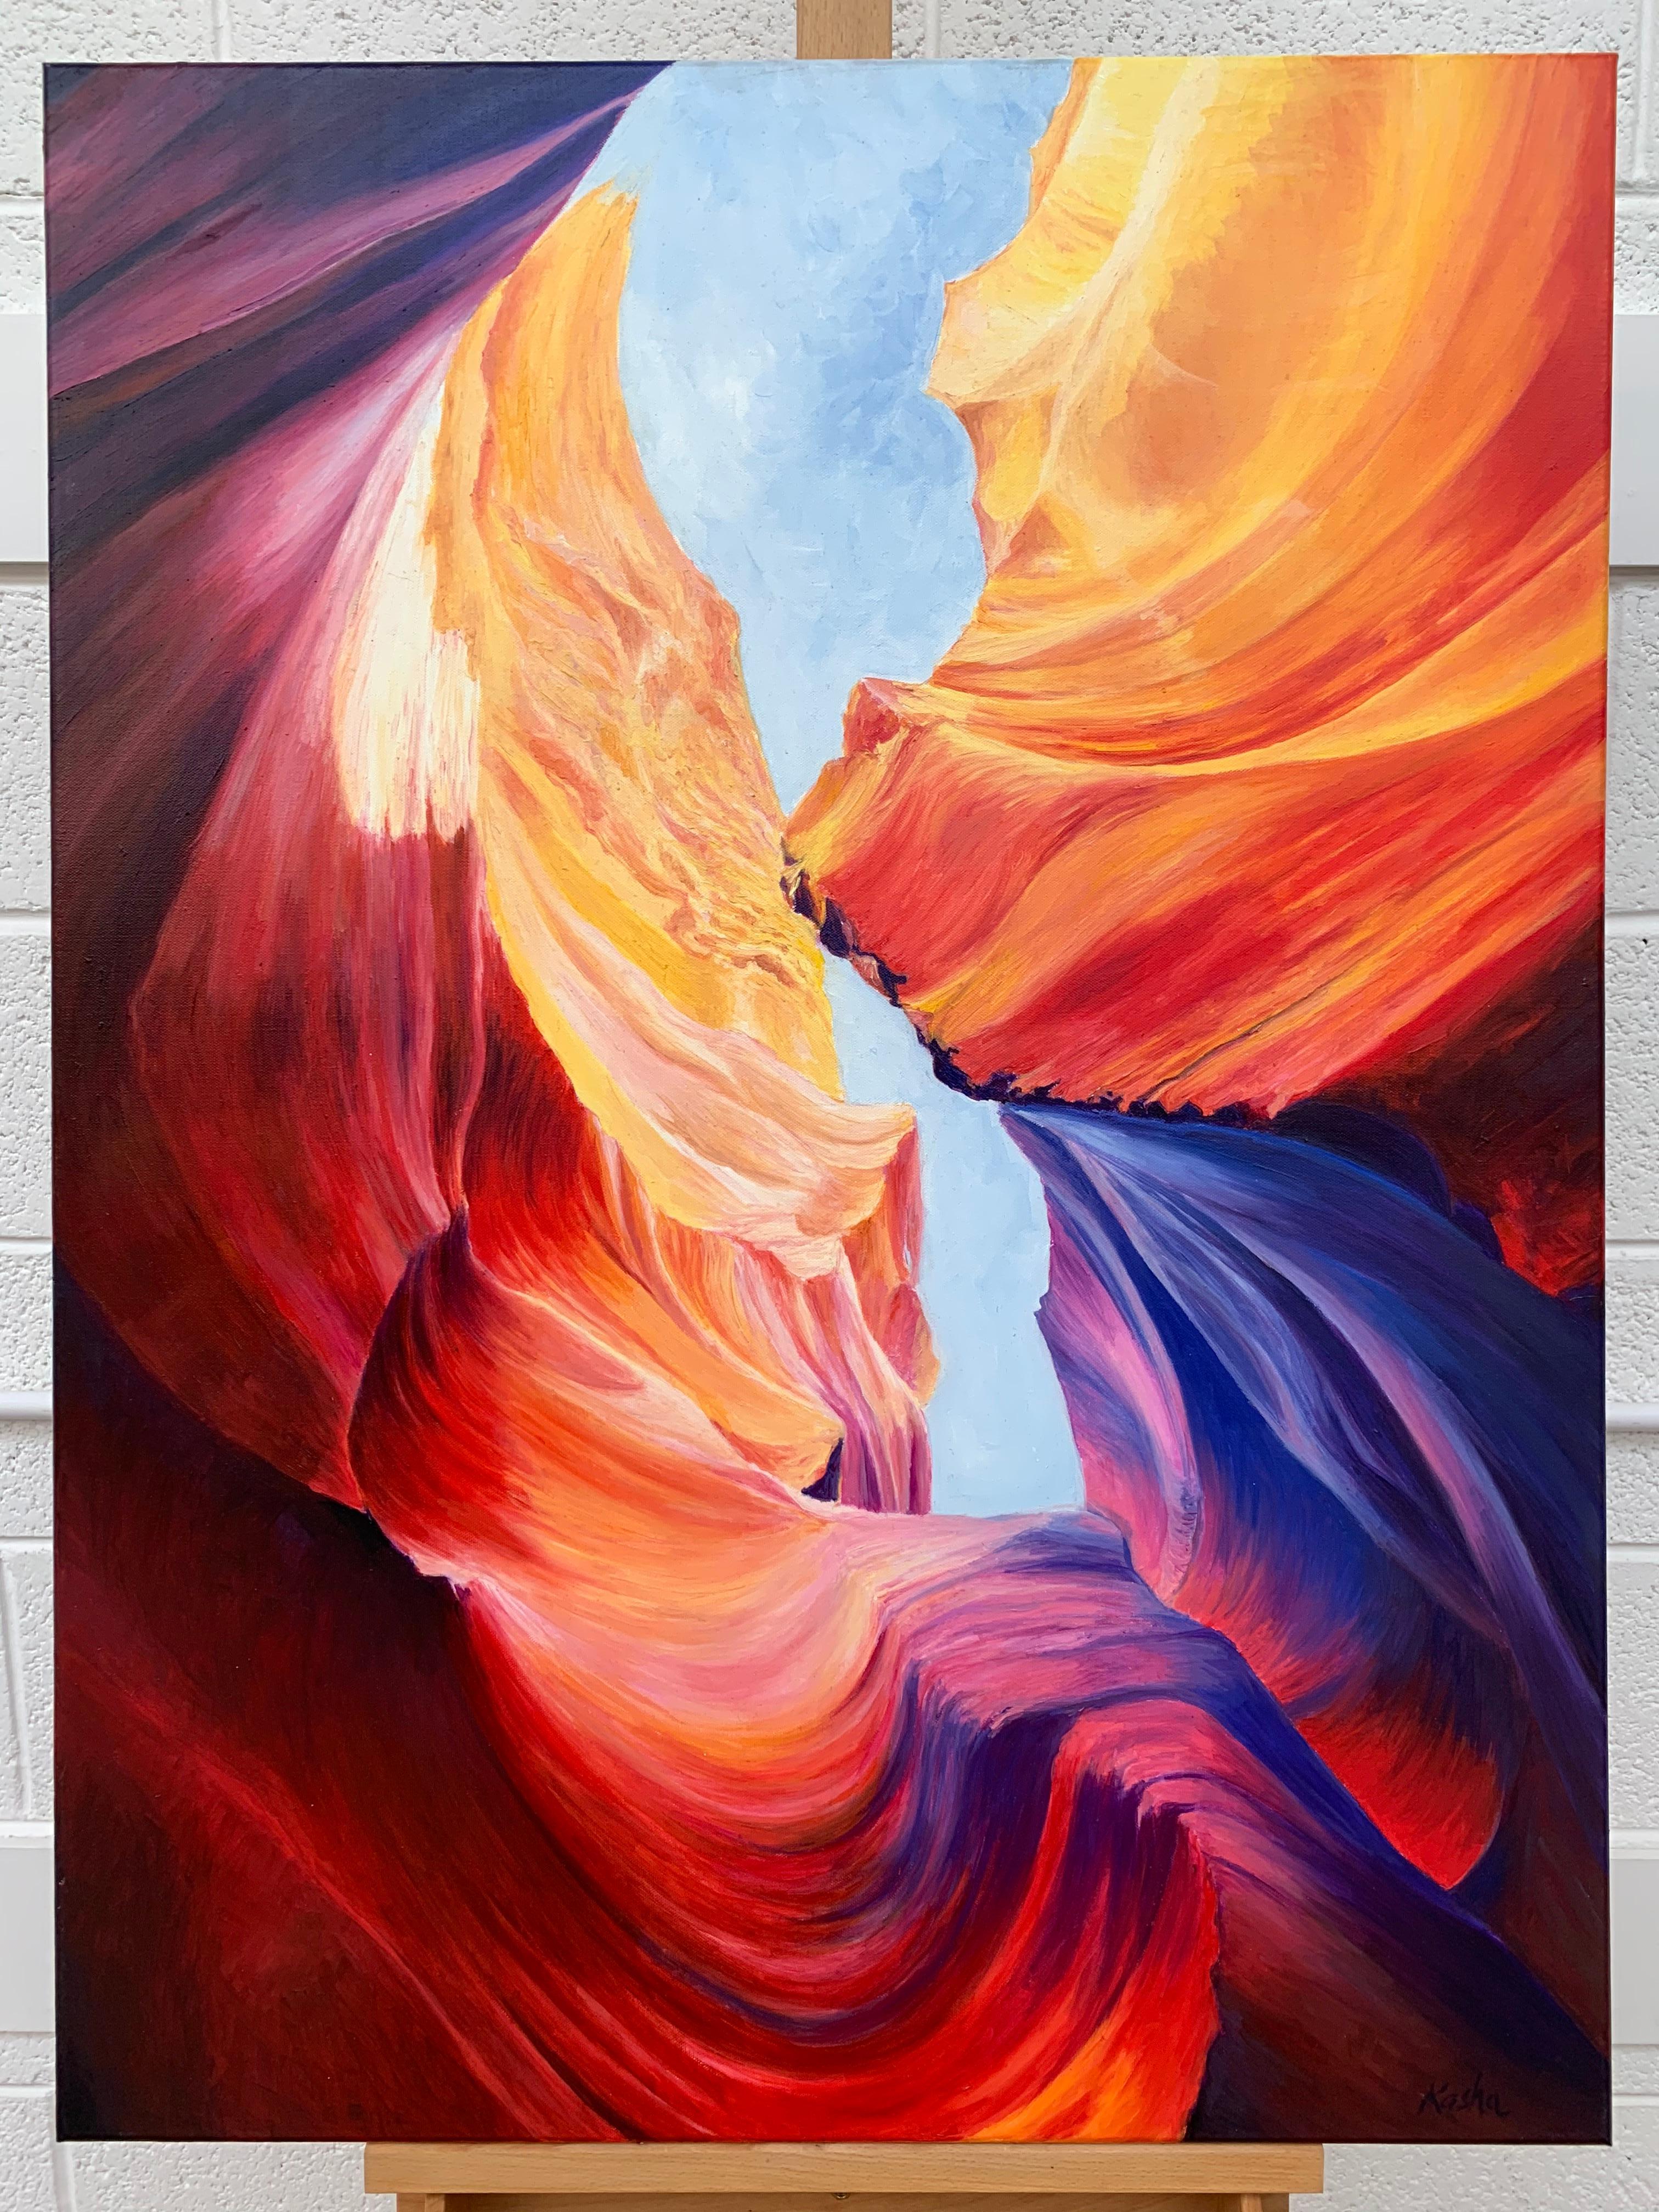 Red Blue & Purple Modern Abstract Painting of Inside Antelope Canyon Arizona by Polish Artist Katarzyna Szulc. This original oil painting is part of an inspired body of work based on one of the most significant rock formations in the world - the